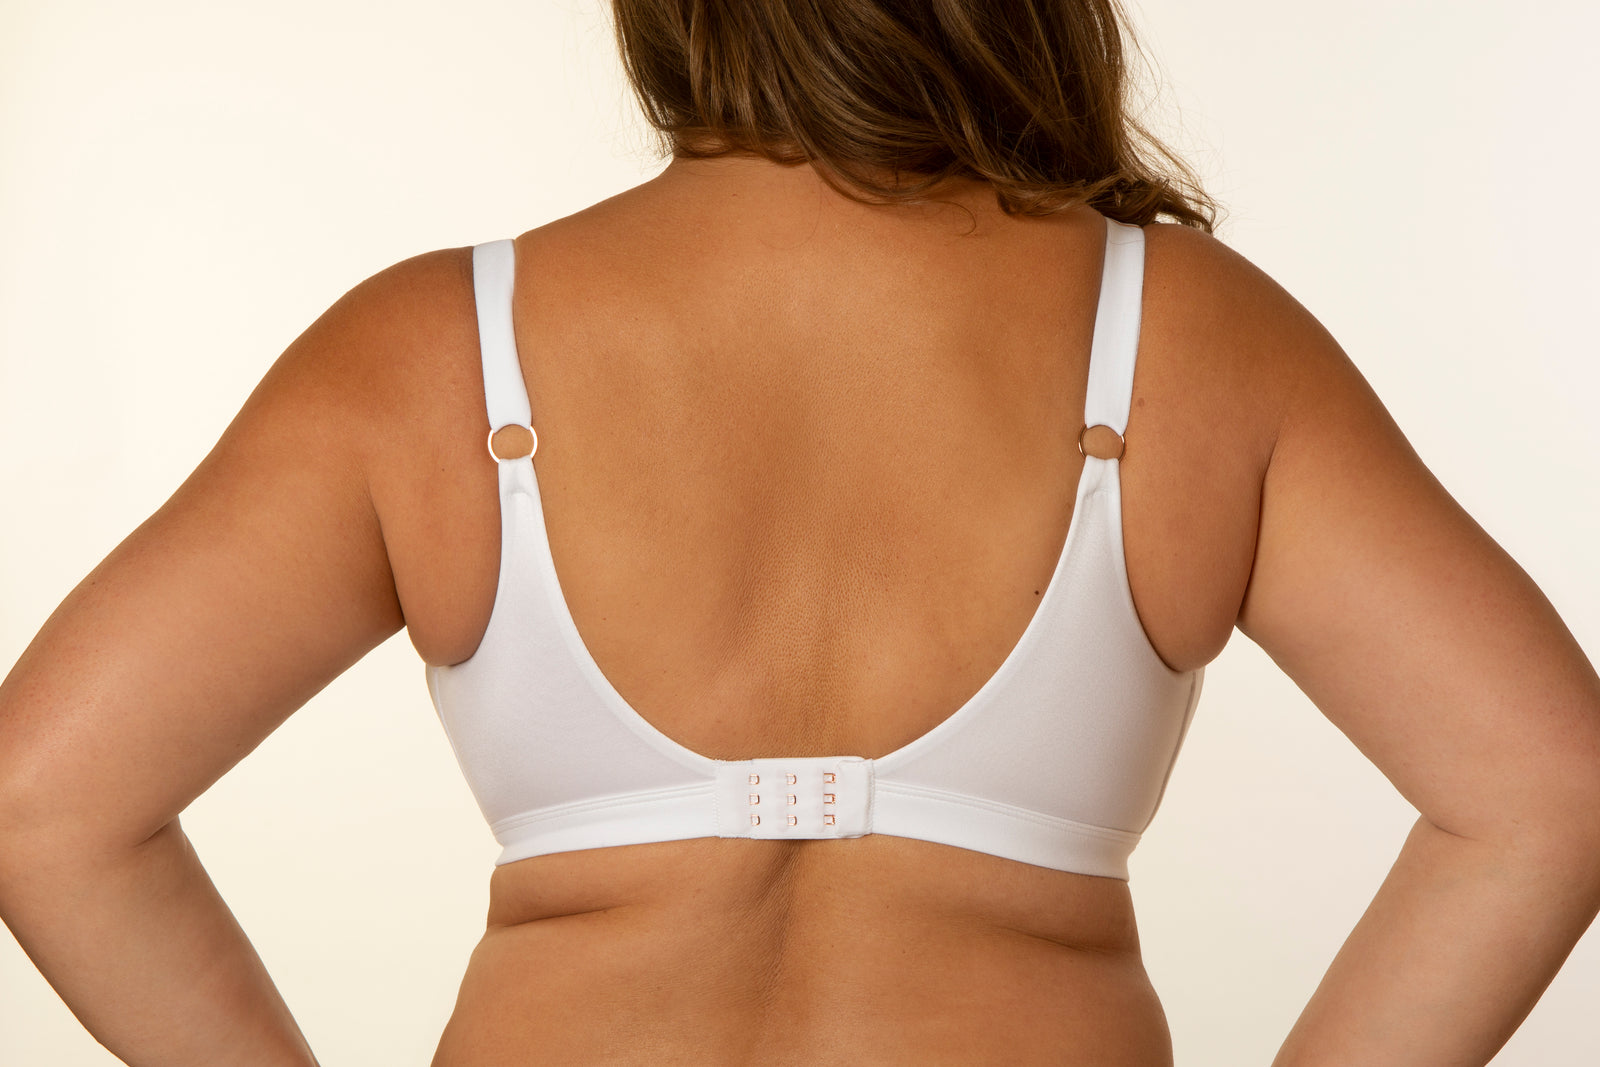 Introducing the new full coverage sports bra that comes with non